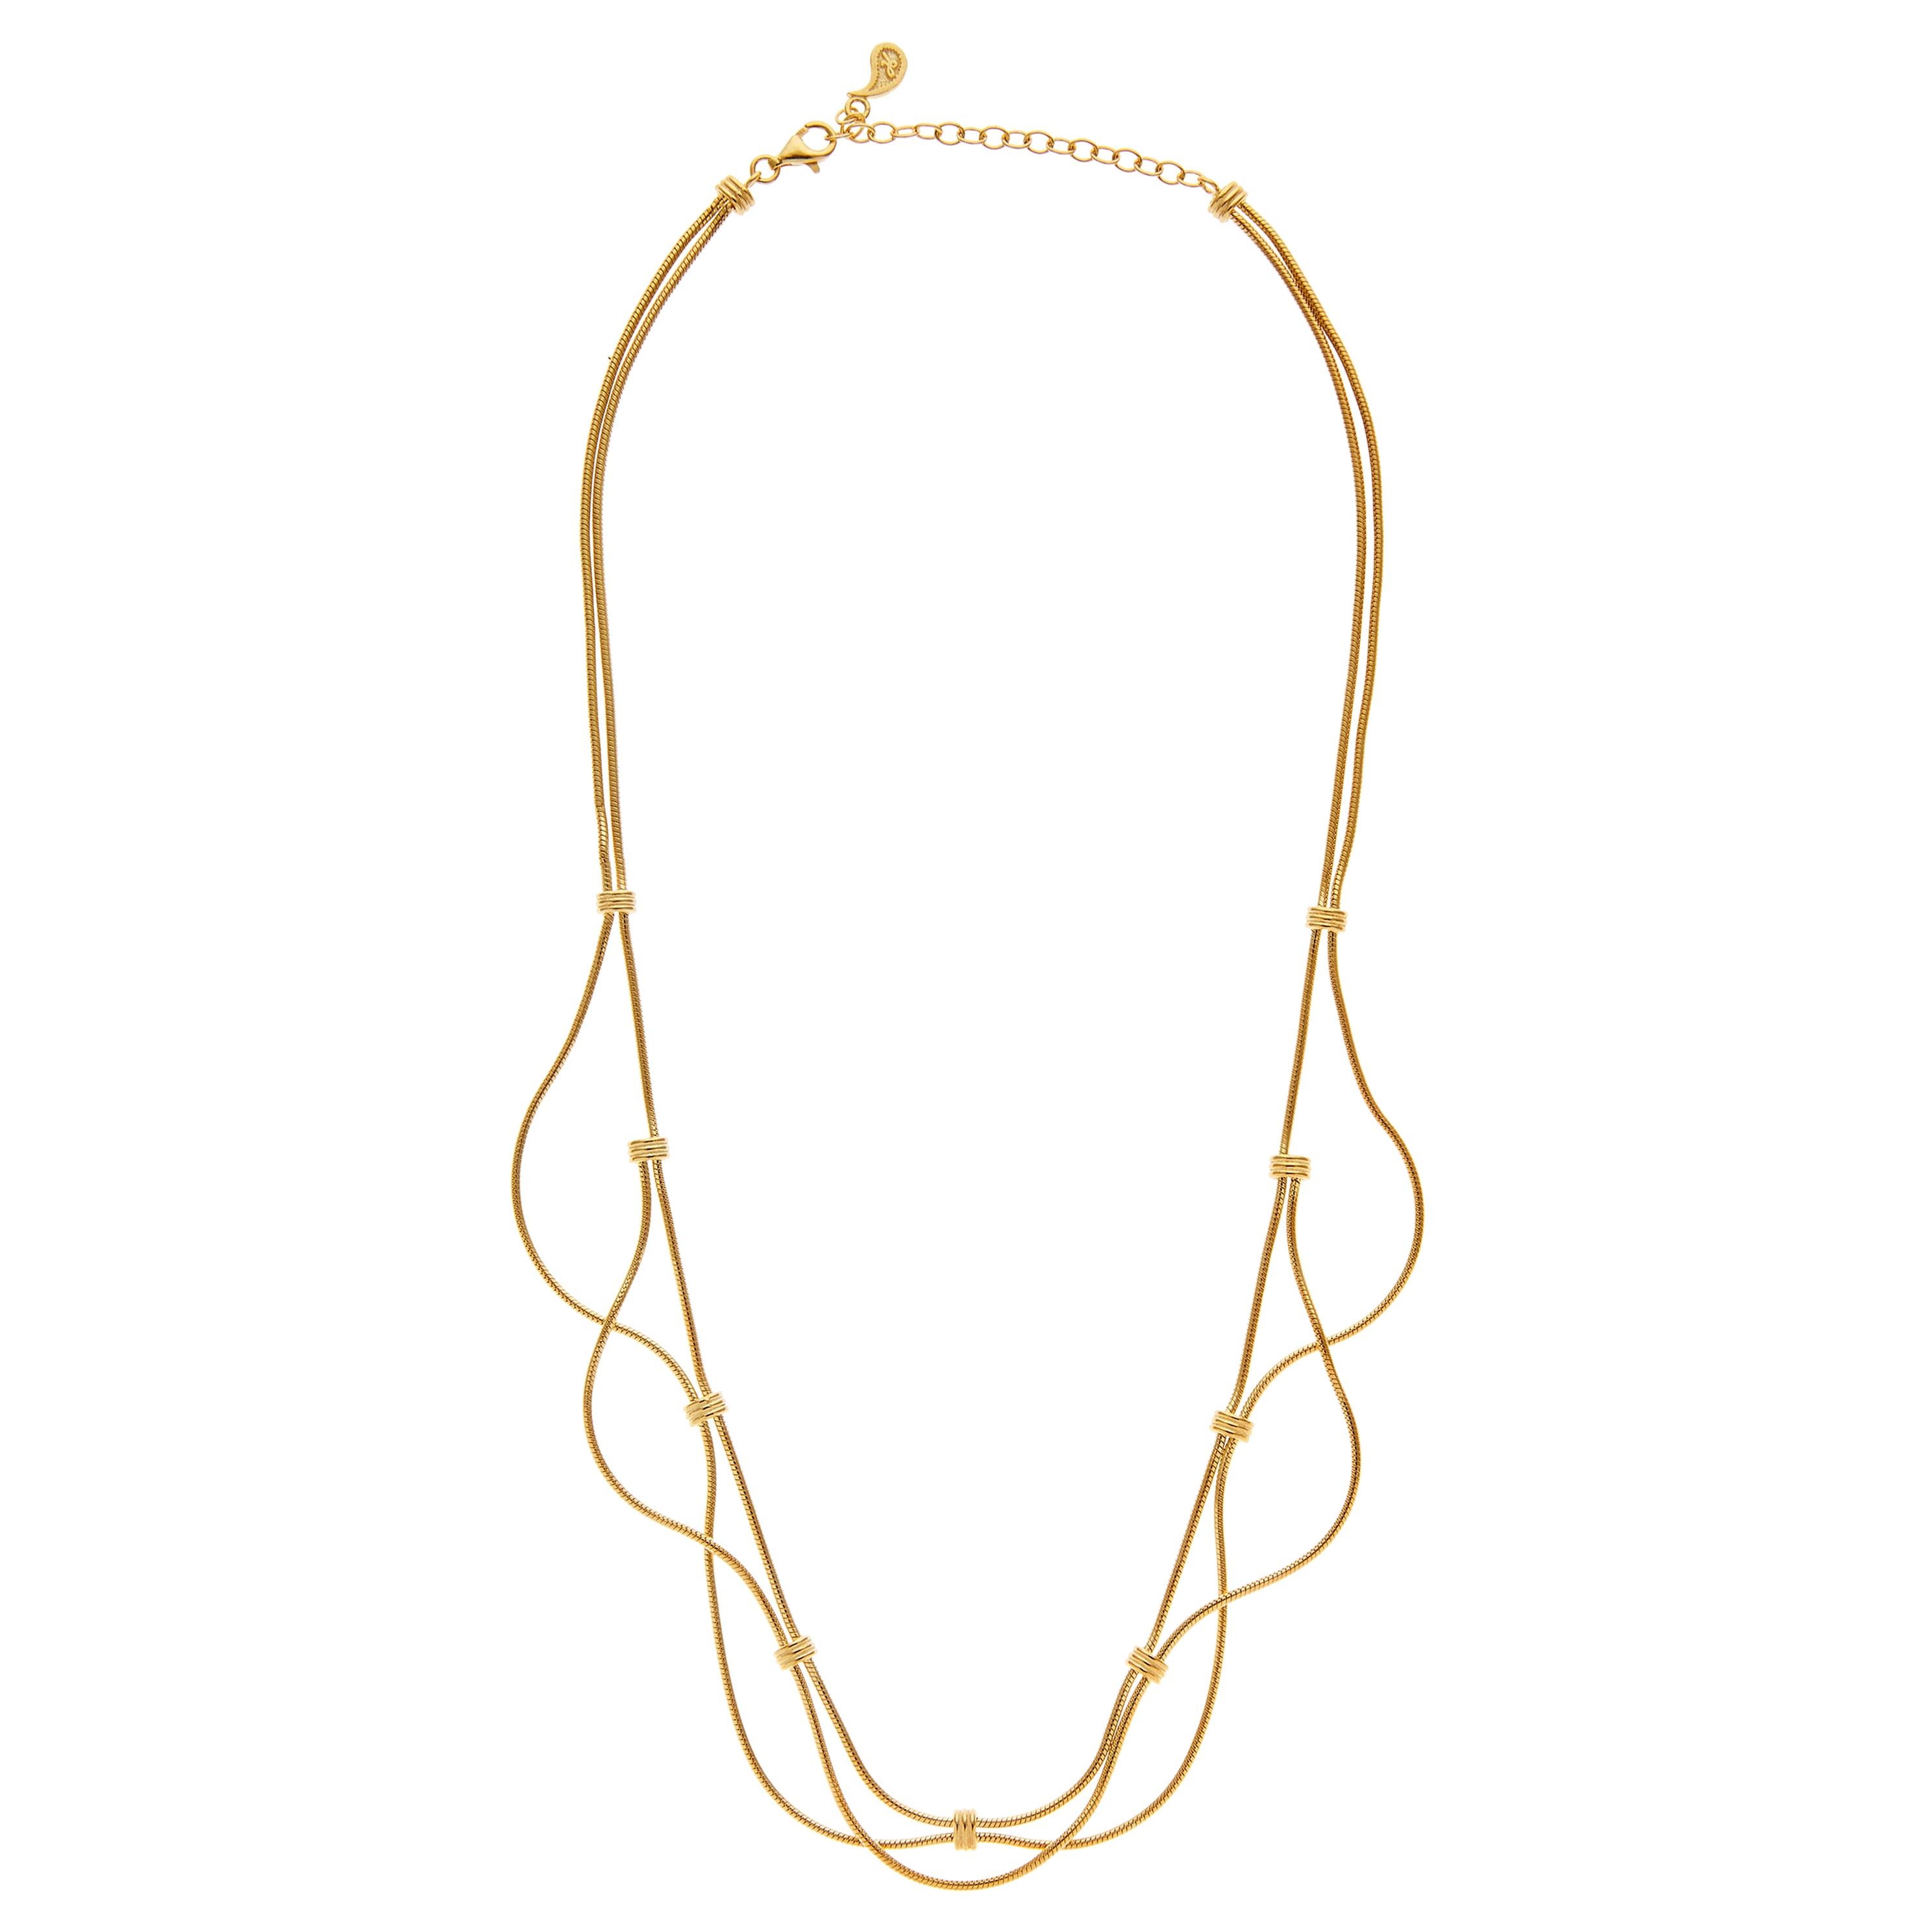 Necklace Snake Chain Minimal Movement 18k Gold-Plated Silver Greek Jewelry